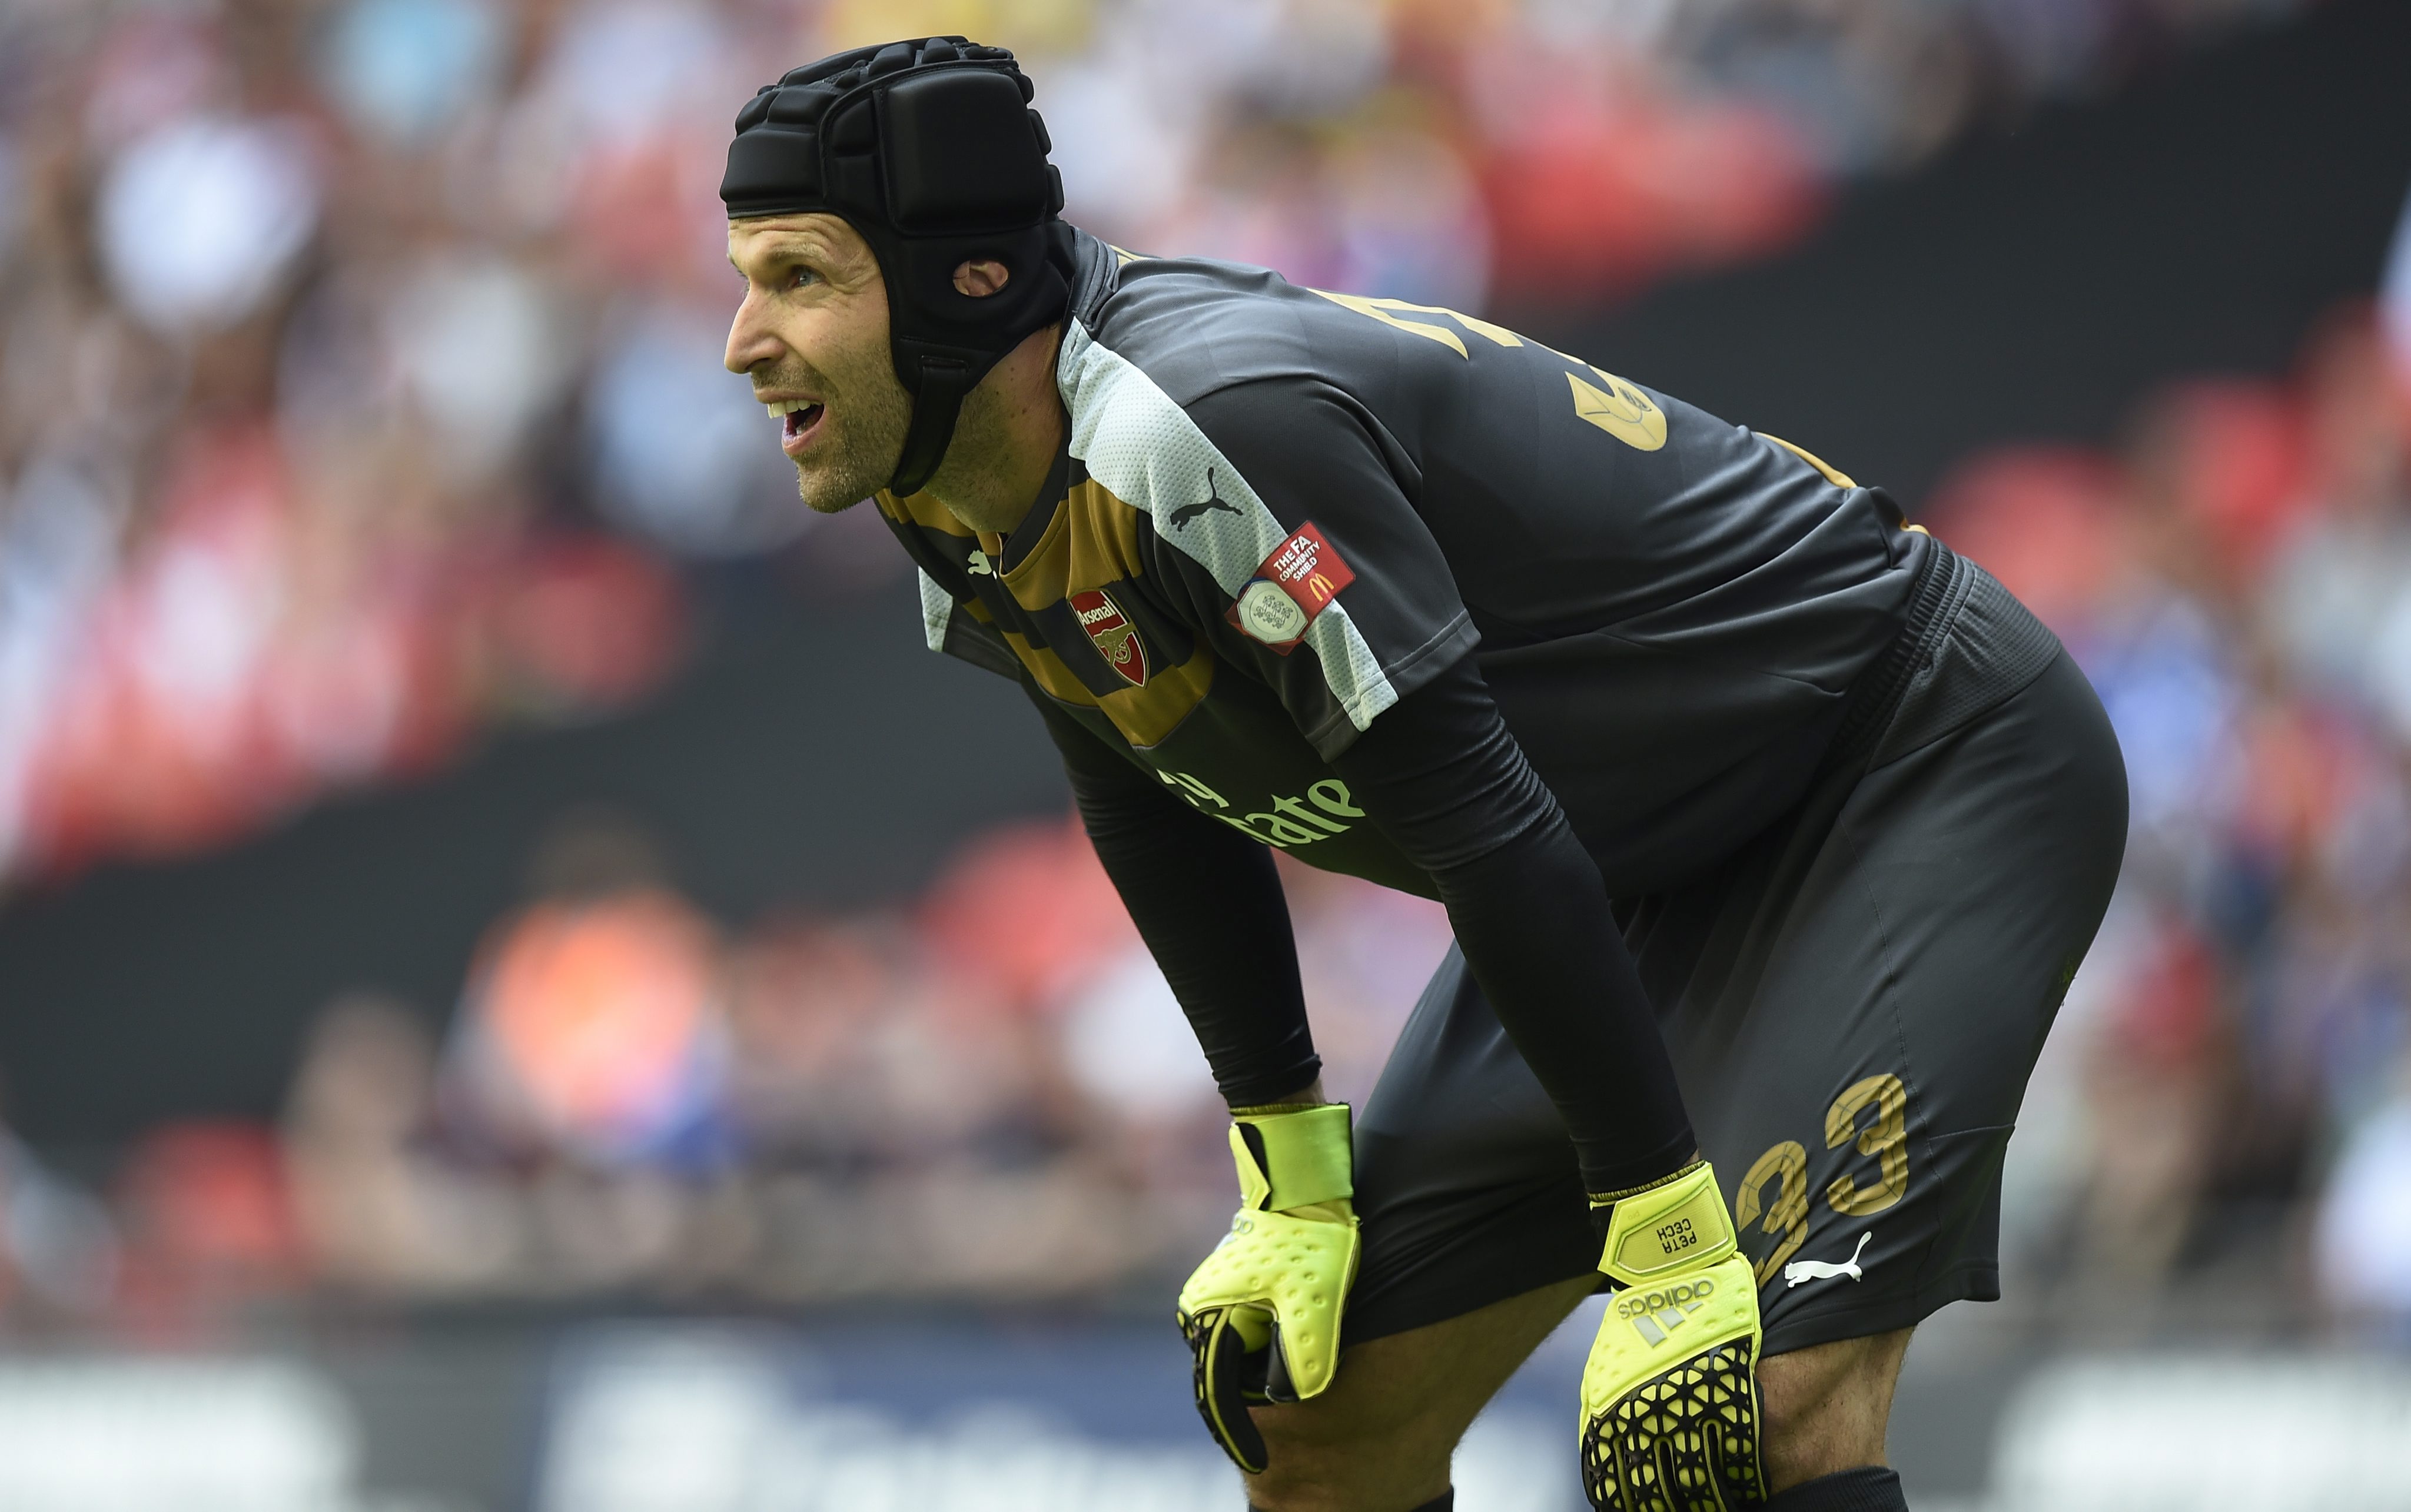 Petr Cech should be back in the side after Ospina's costly mistake